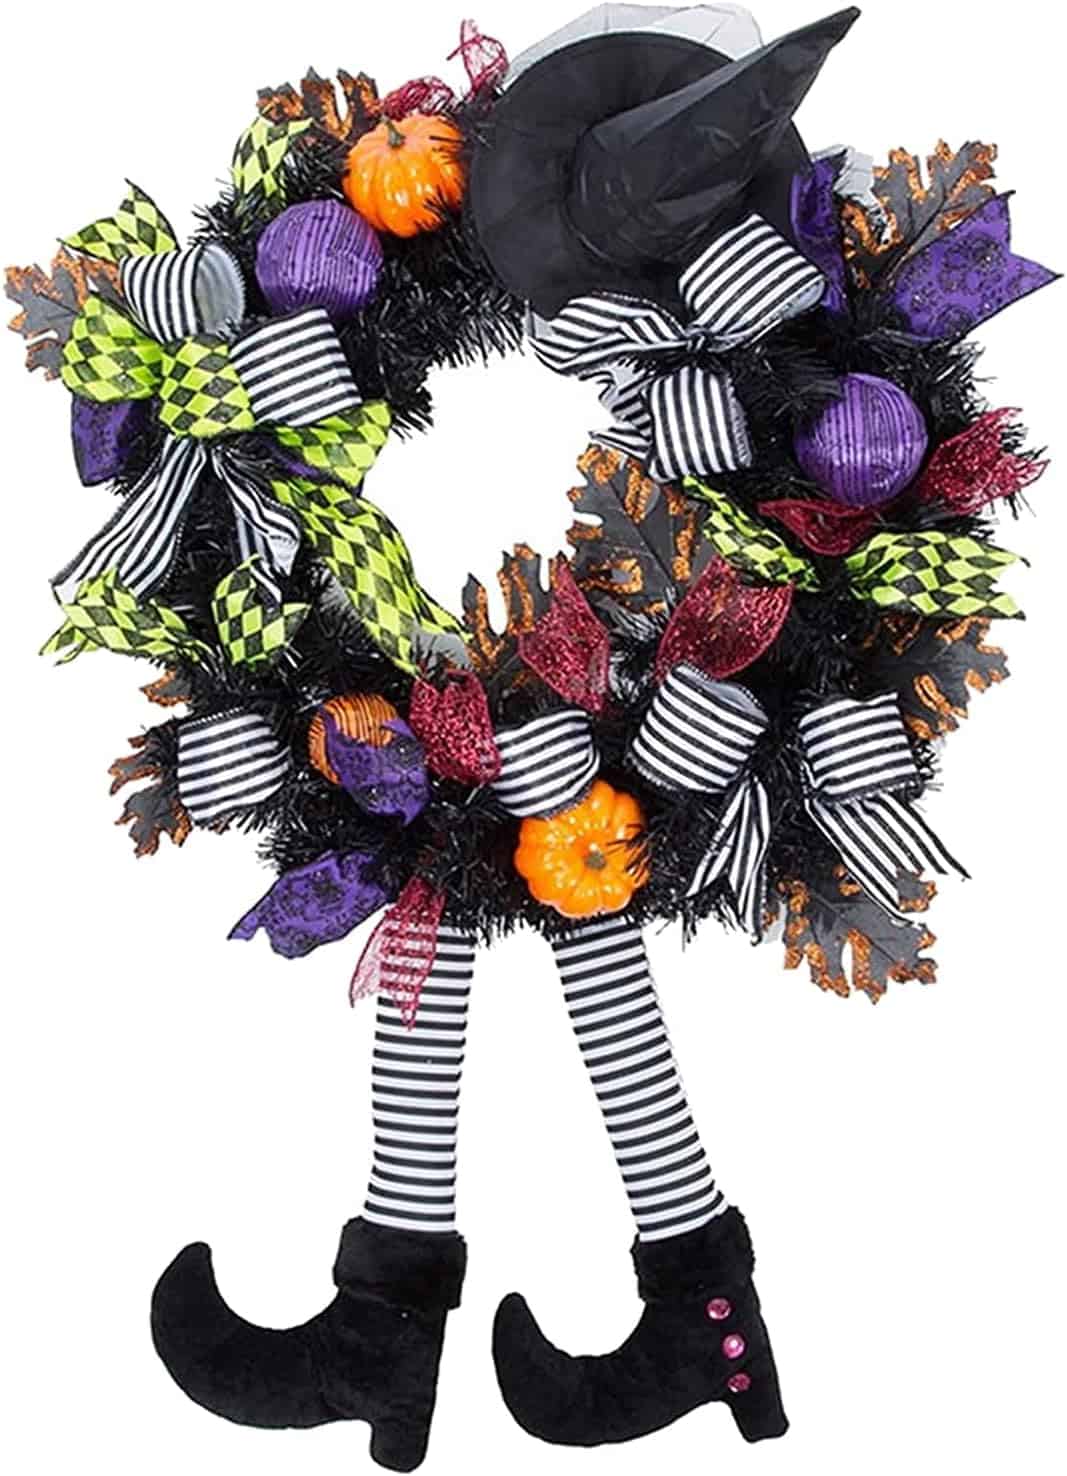 24 Inch Witch Halloween Wreath with Hat Witches Legs Pumpkin, Halloween Decorations for Door,Porch,Window,Indoor and Outdoor Decor